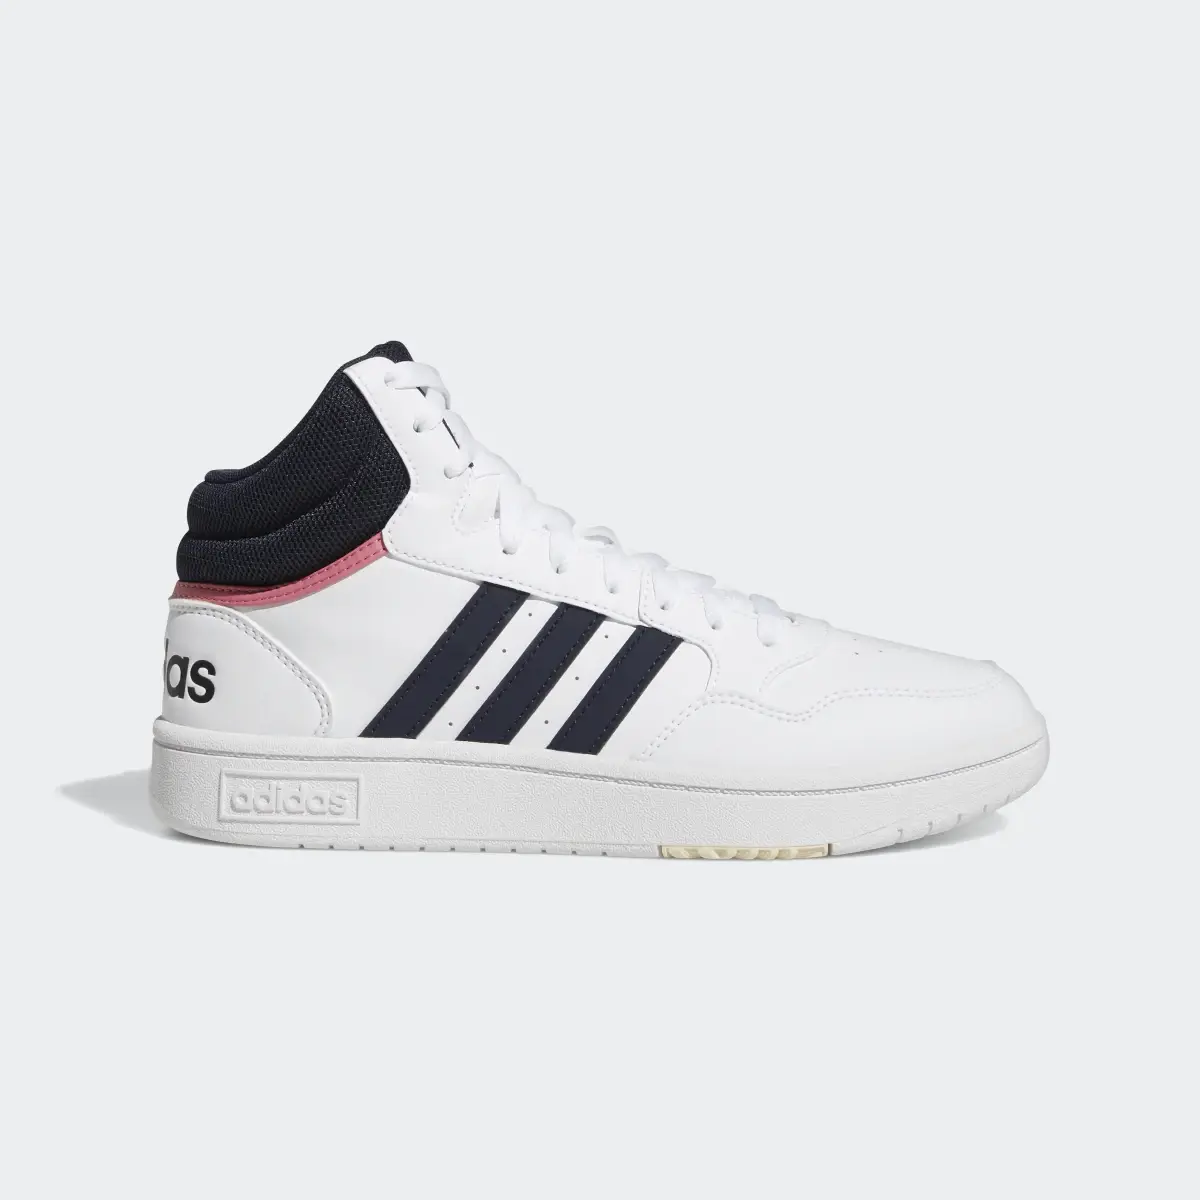 Adidas Hoops 3.0 Mid Classic Shoes. 2